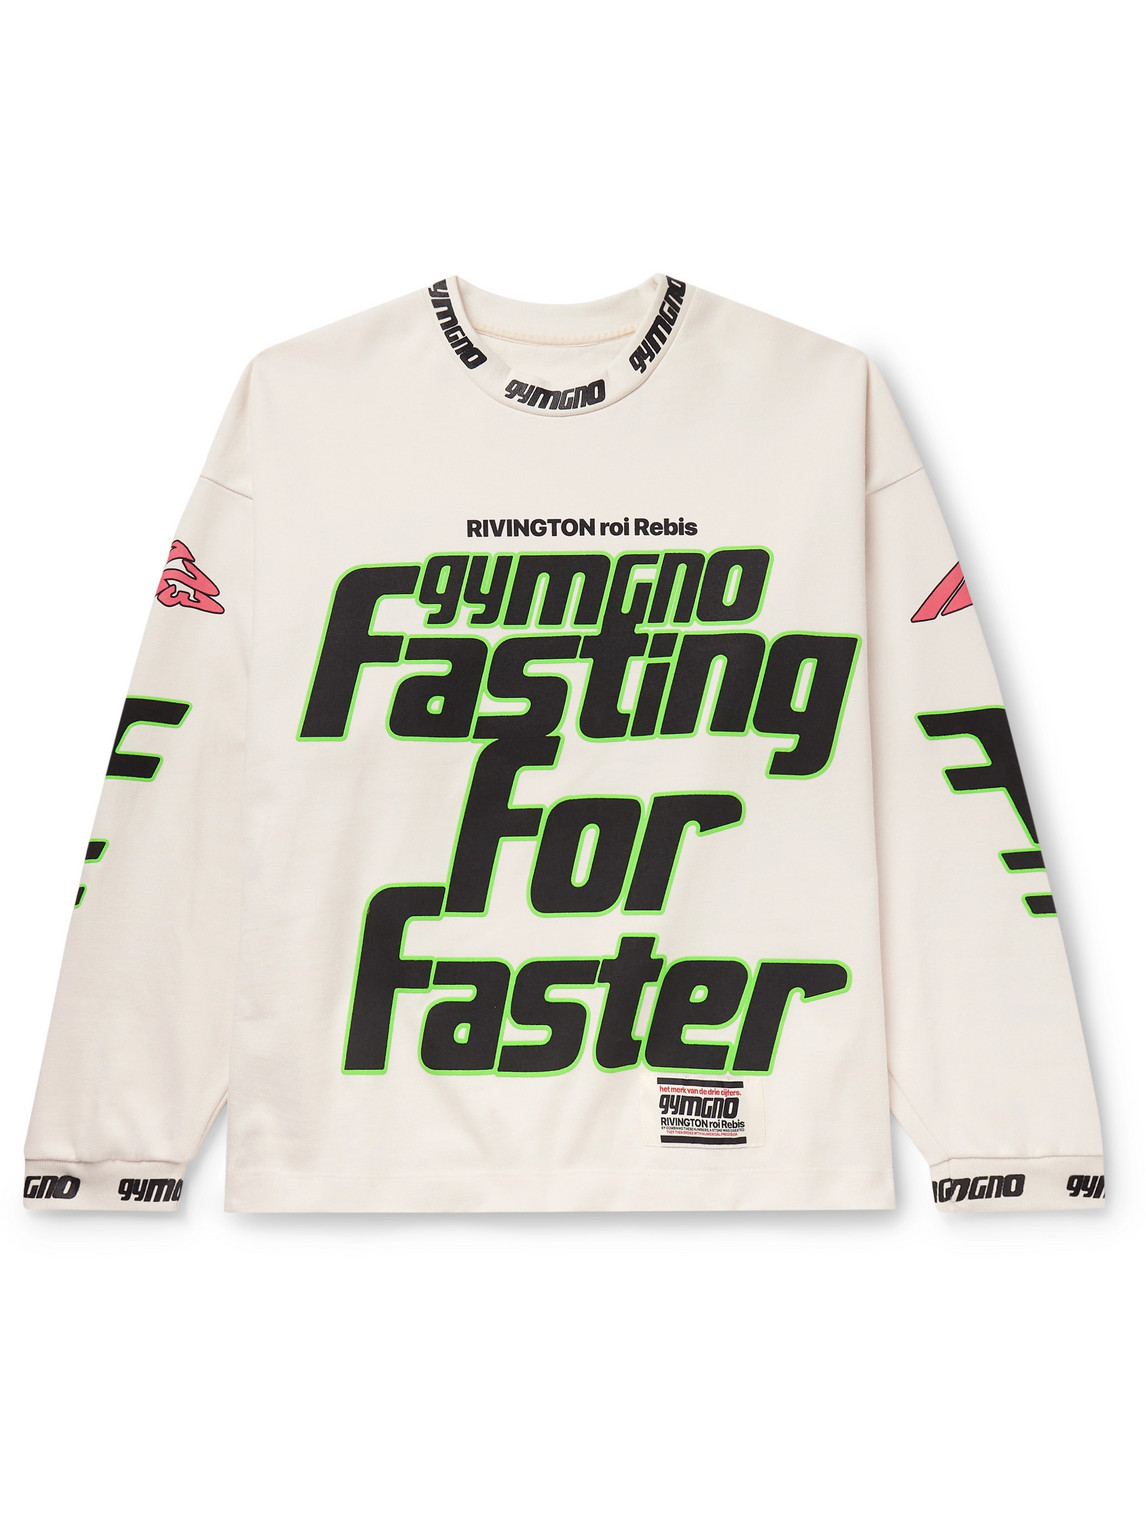 Rrr123 Fasting For Faster Oversized Printed Appliquéd Cotton-jersey Sweatshirt In Neutrals